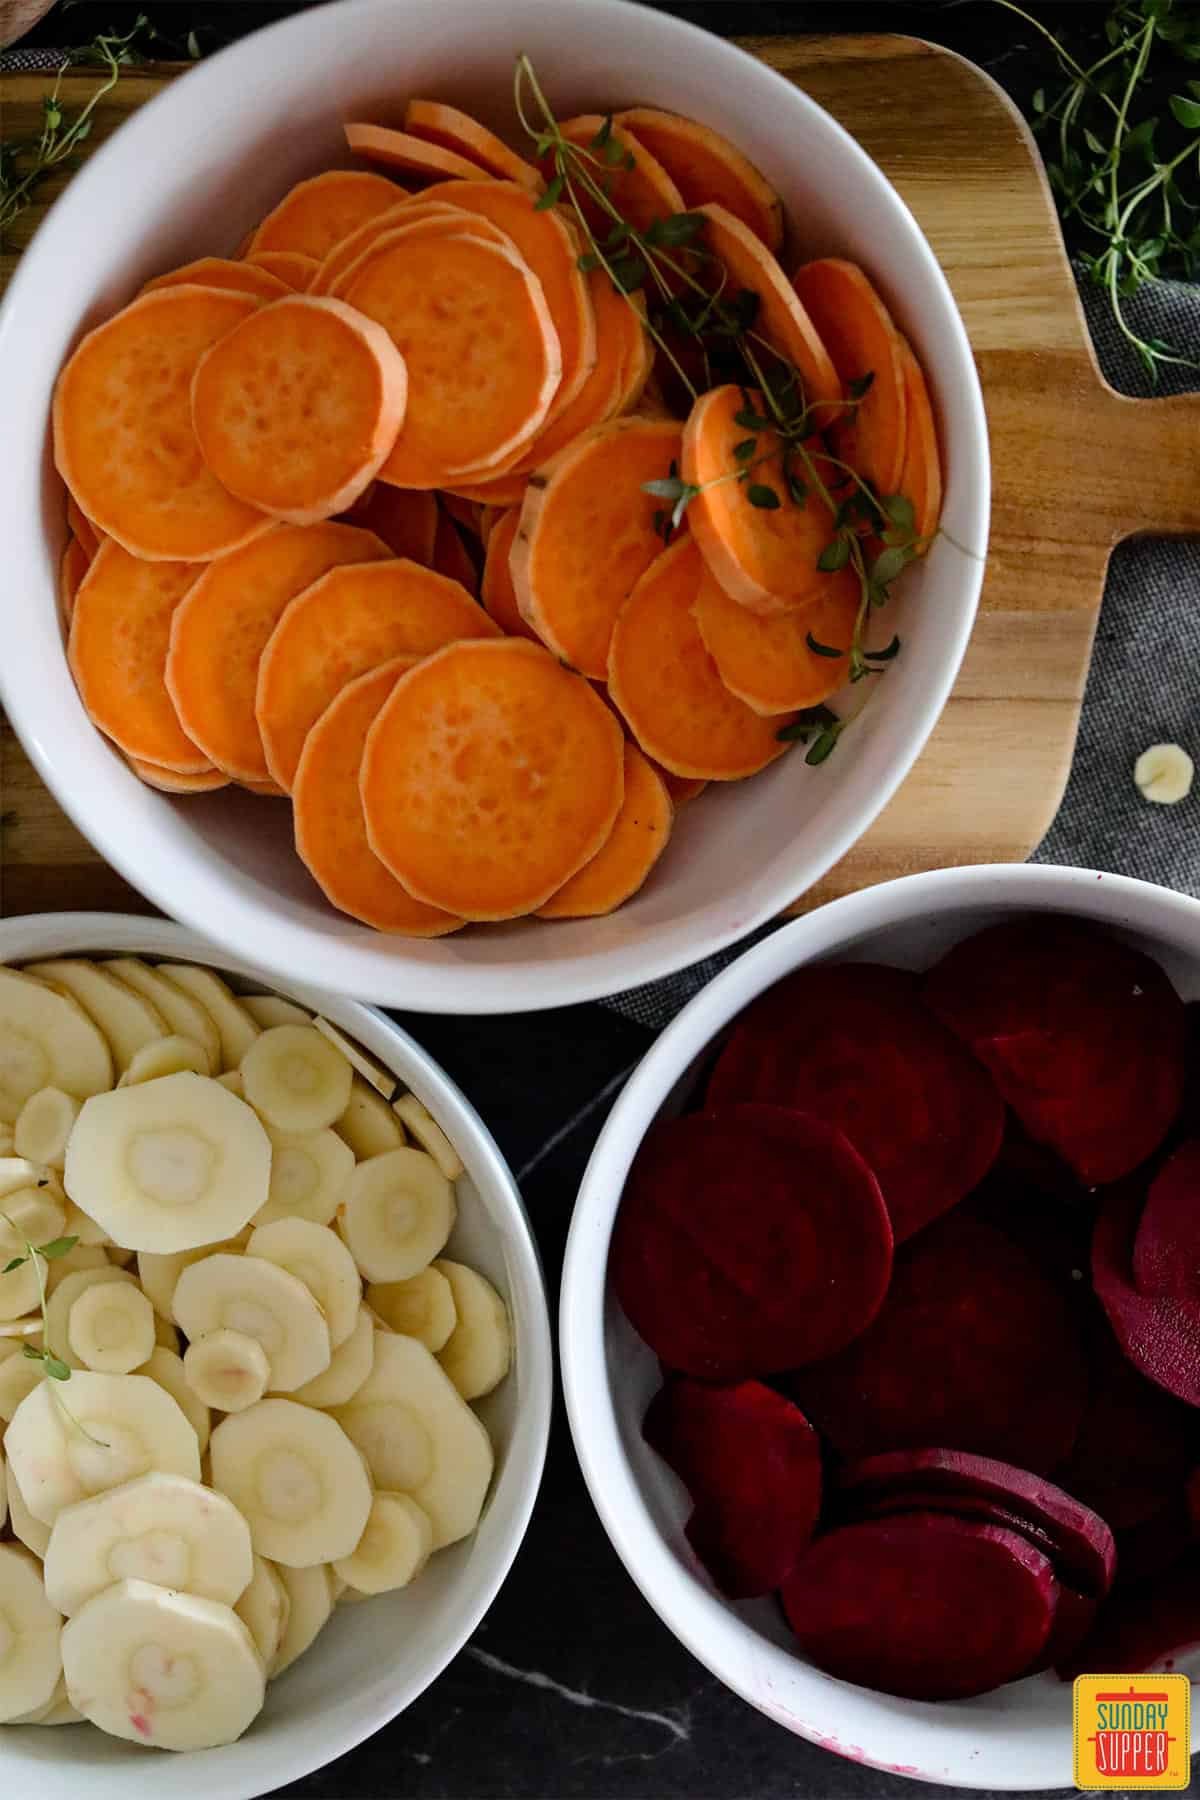 Sliced sweet potatoes, sliced parsnips, and sliced beets in individual white bowls